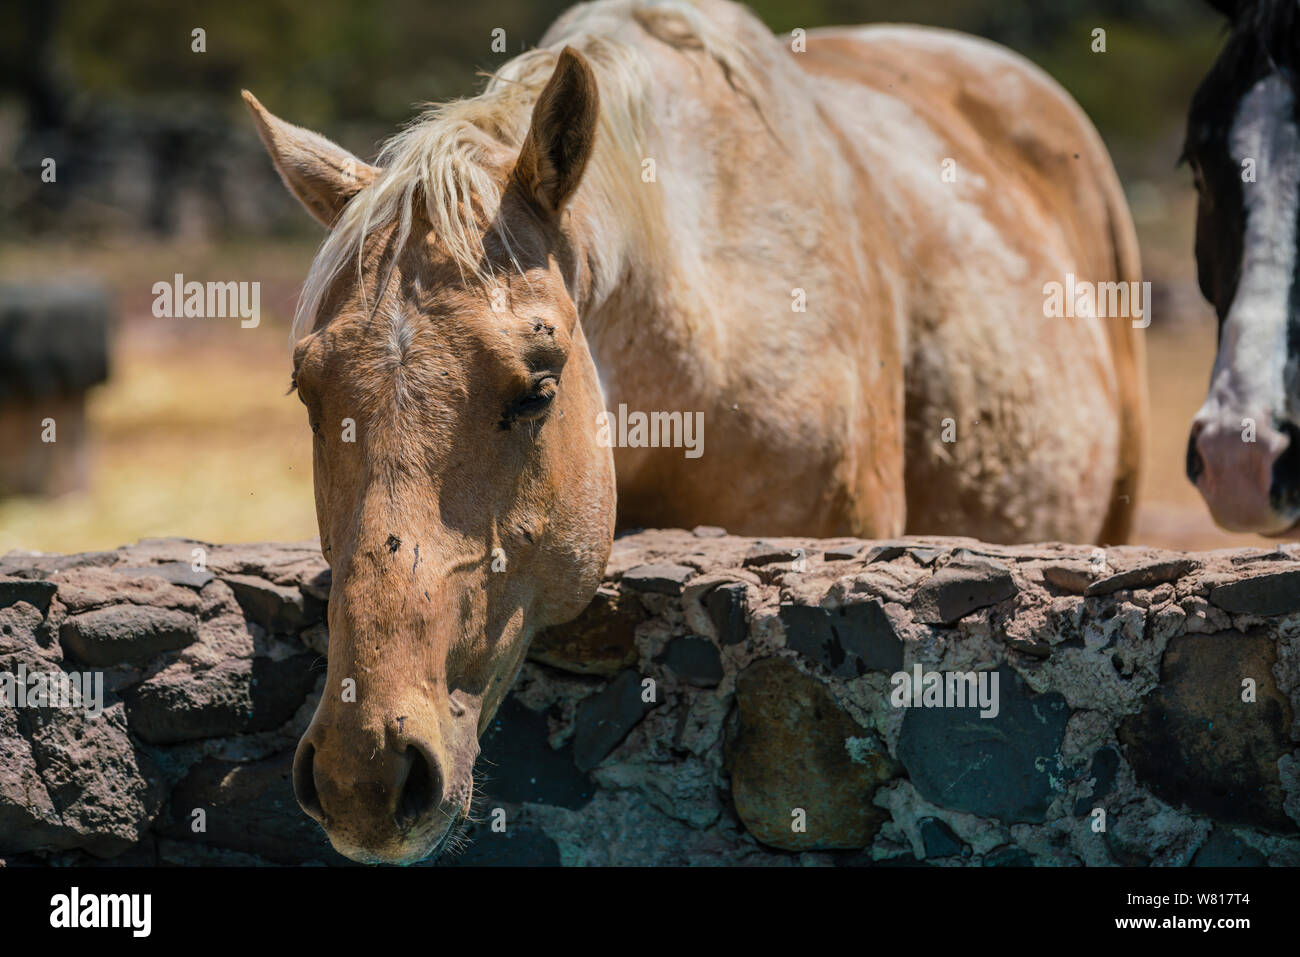 a skewball - brown and white - horse peering over and resting its head on a wall at a ranch. Stock Photo